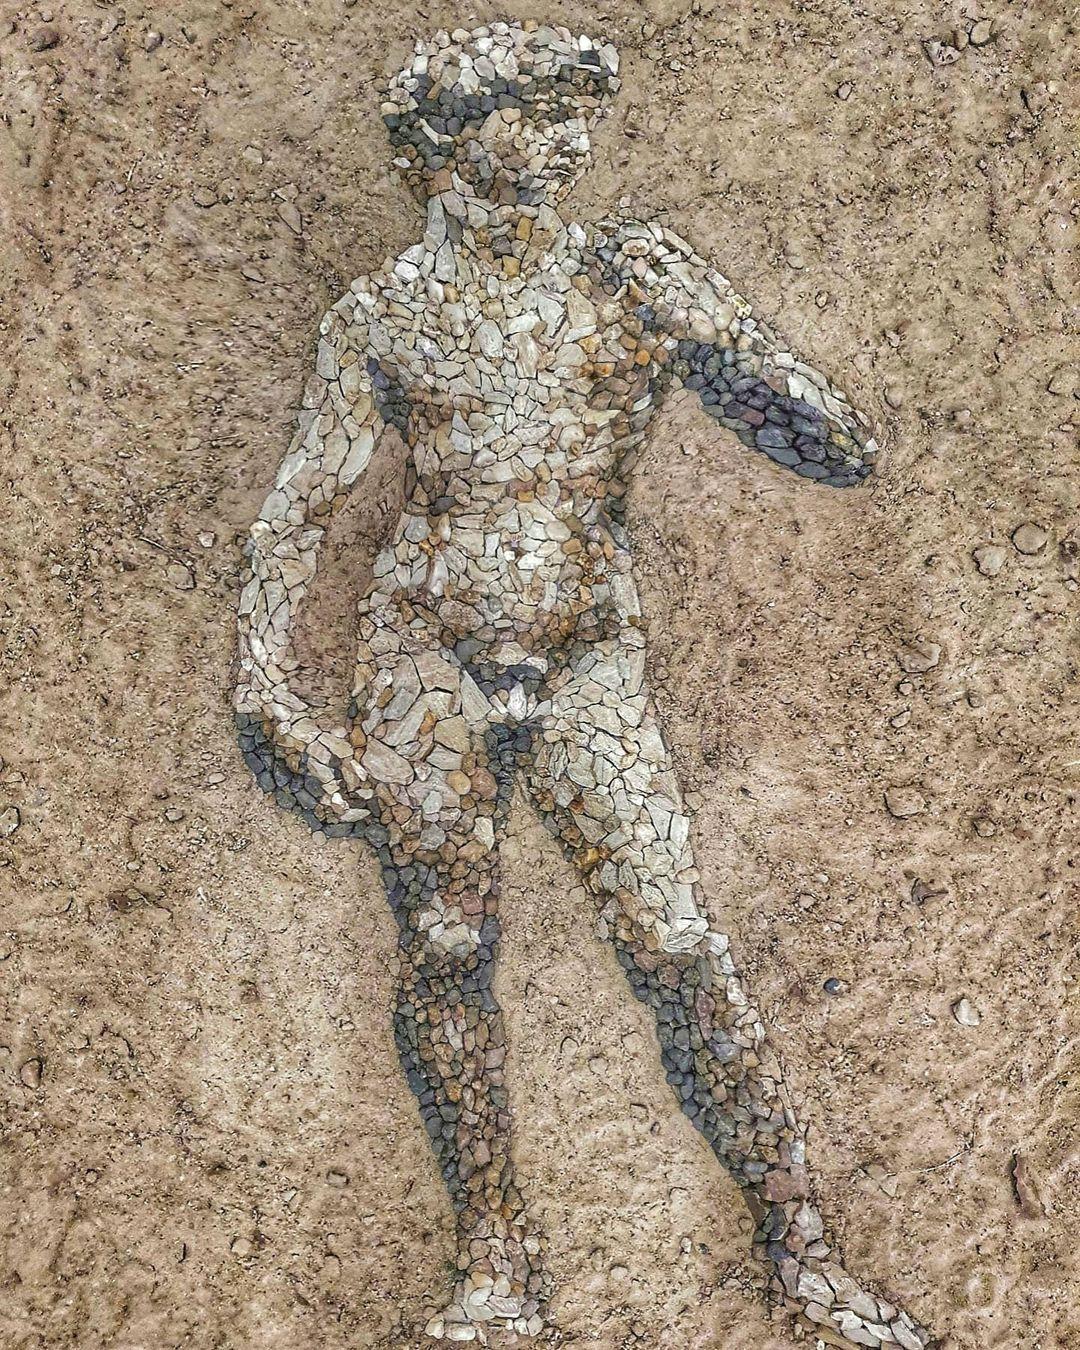 A pebble-painted rendering of Michelangelo's David. (Courtesy of <a href="https://www.facebook.com/justin.bateman1">Justin Bateman</a> and <a href="https://www.instagram.com/pebblepicassos/">@pebblepicassos</a>)